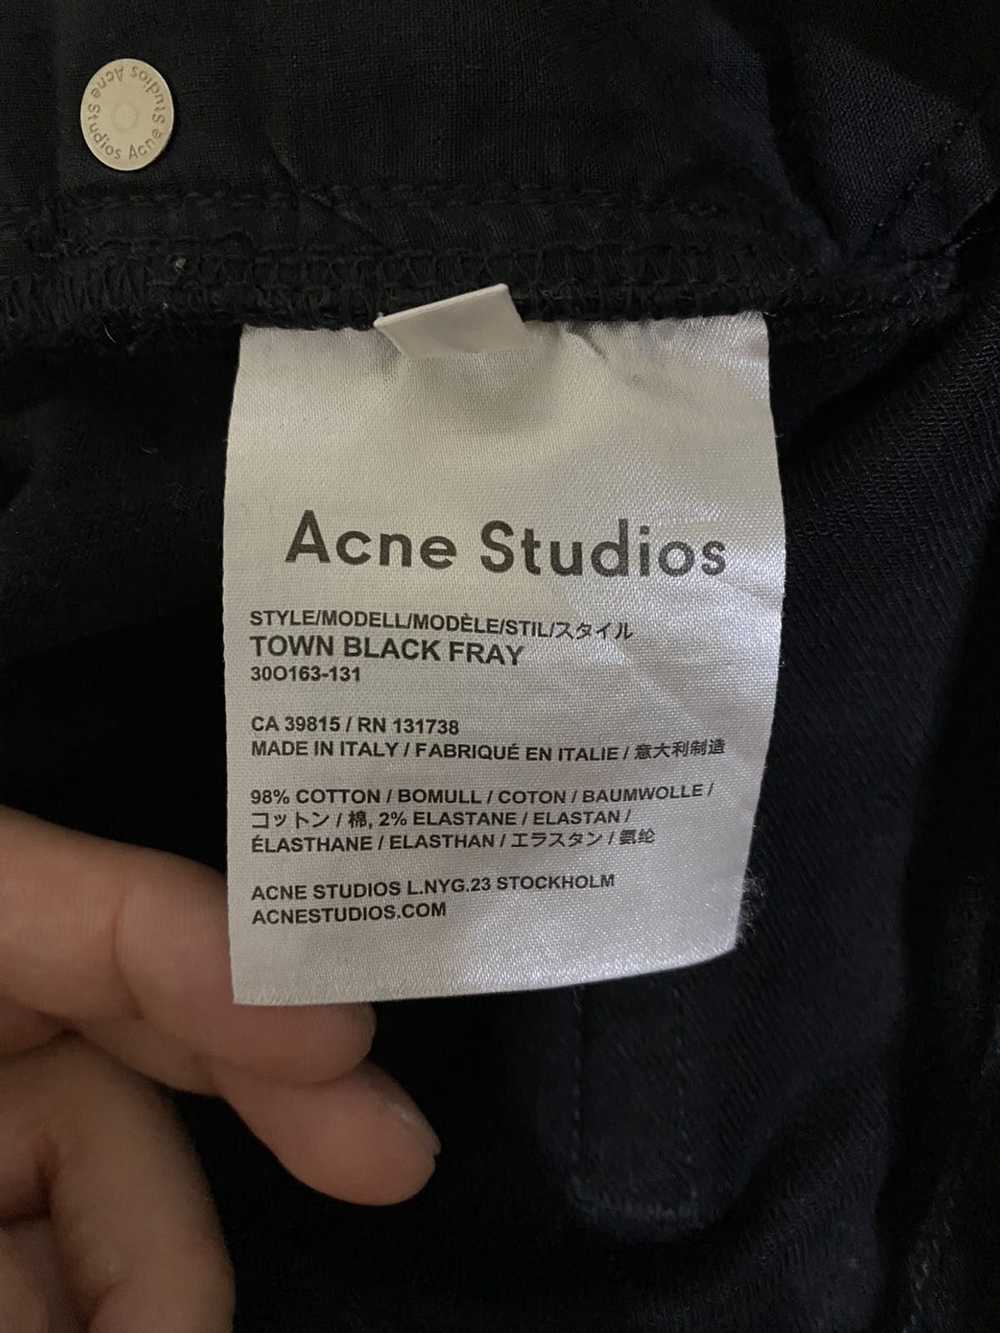 Acne Studios acne town jeans black fray cw - image 3